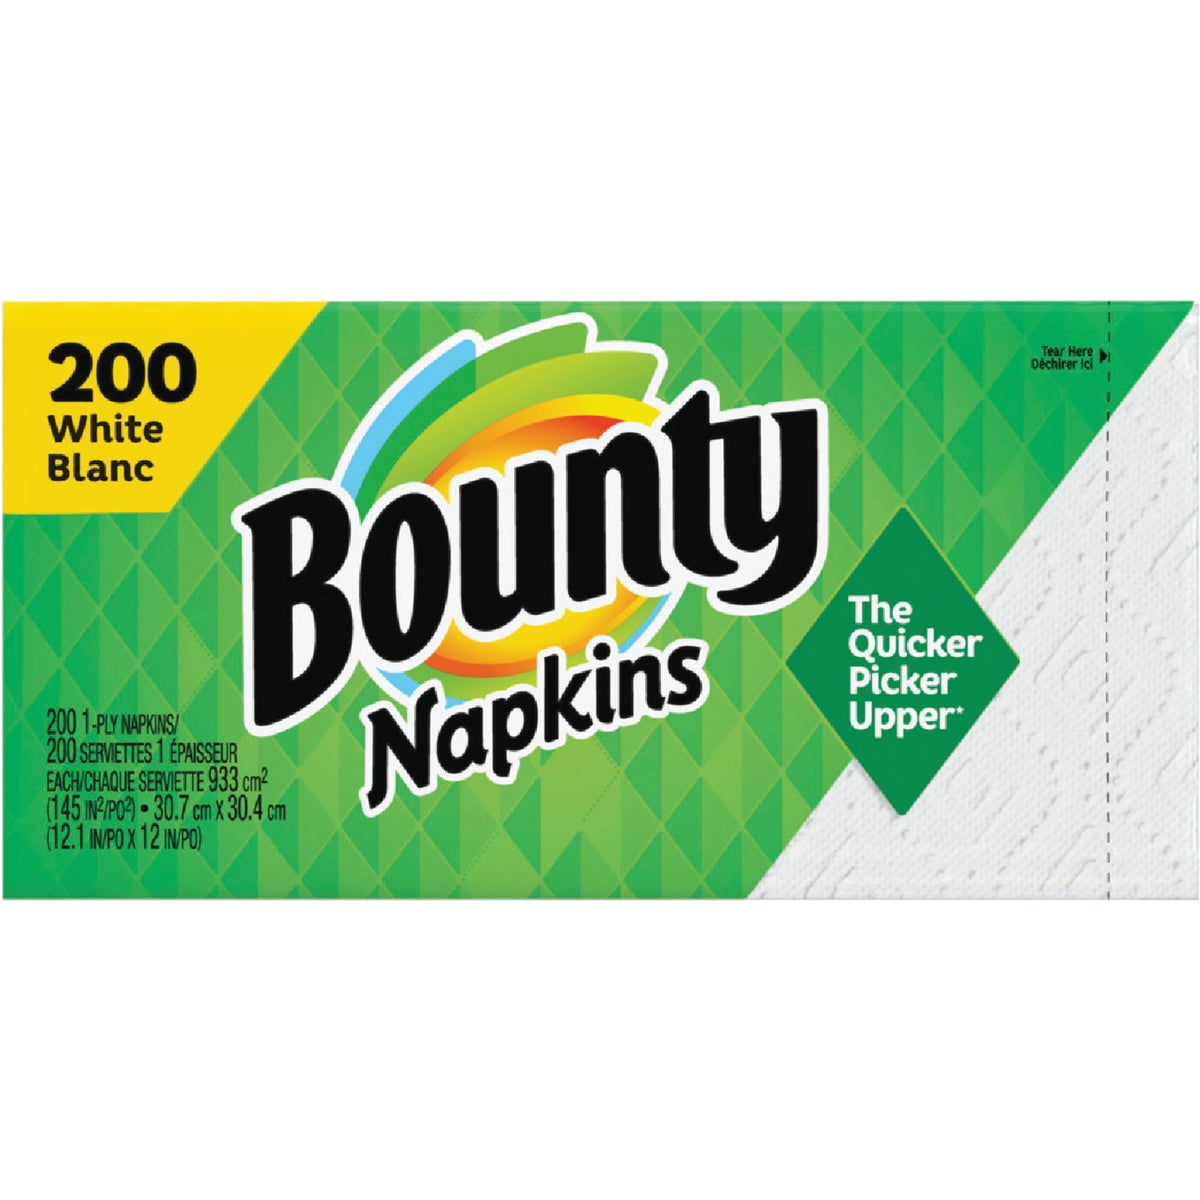 Item 608602, Paper napkins are thick, strong, and absorbent to last long during messy 